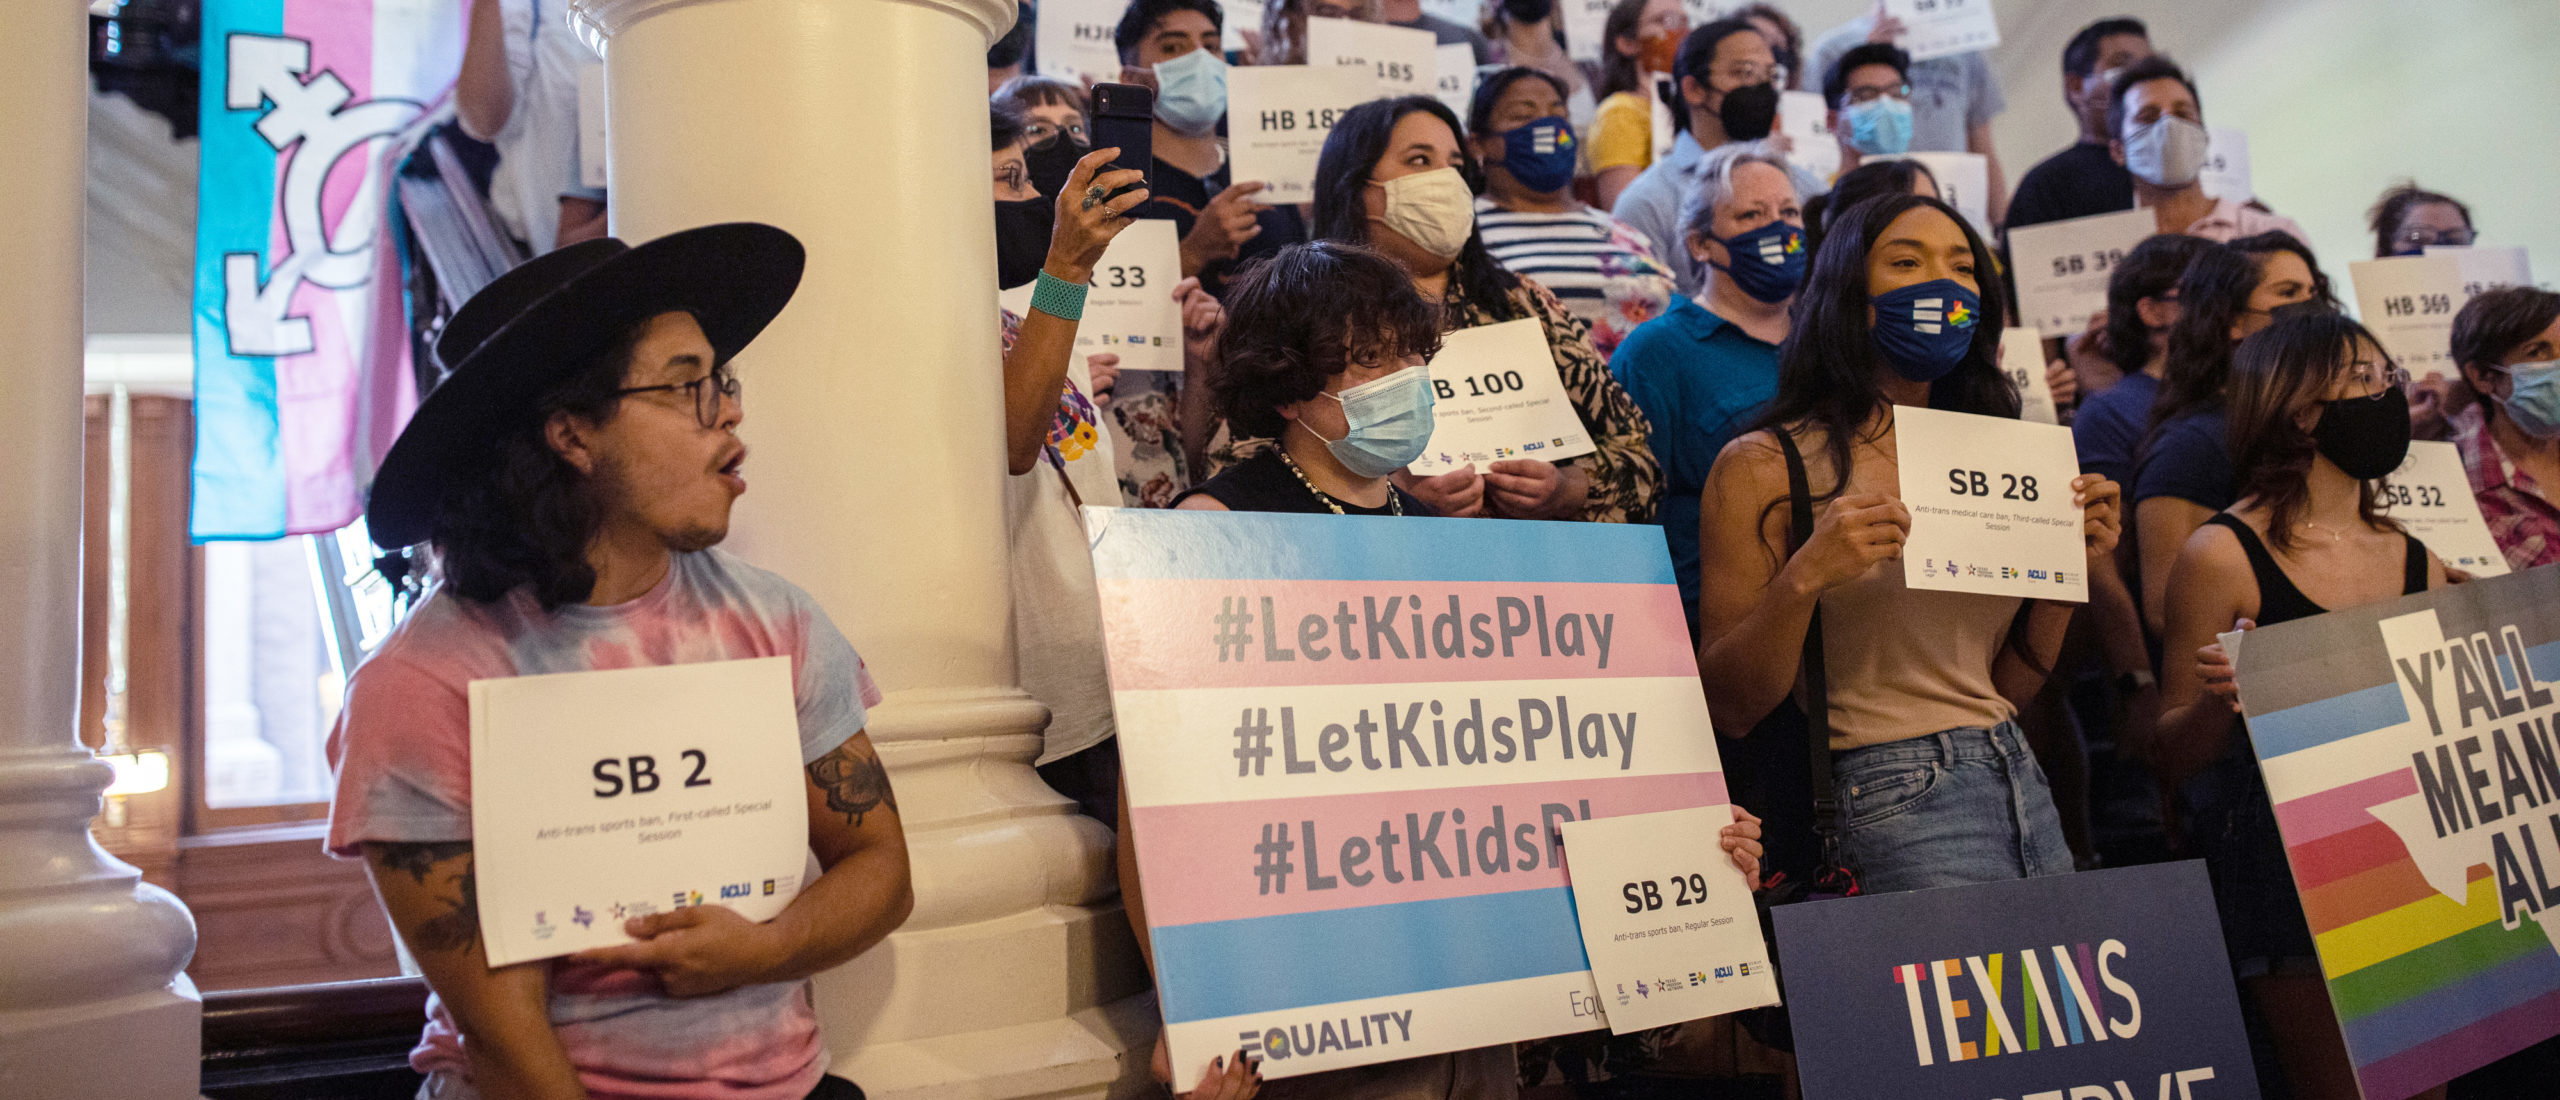 AUSTIN, TX - SEPTEMBER 20: LGBTQ rights supporters gather at the Texas State Capitol to protest state Republican-led efforts to pass legislation that would restrict the participation of transgender student athletes on the first day of the 87th Legislature's third special session on September 20, 2021 in Austin, Texas. (Photo by Tamir Kalifa/Getty Images)